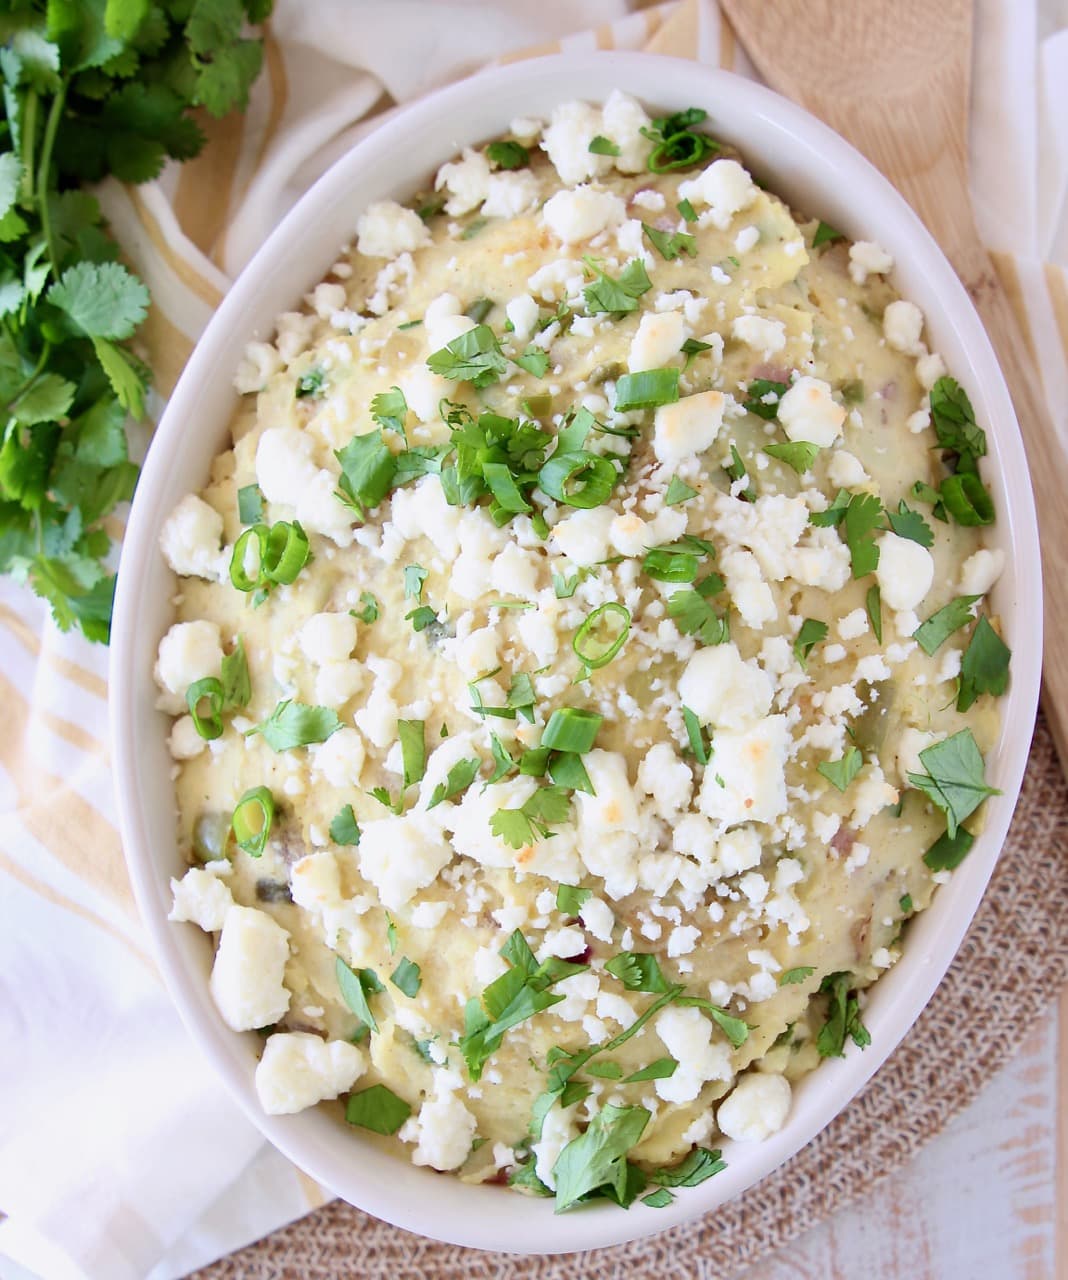 Bowl of mashed potatoes topped with queso fresco, cilantro and green onions